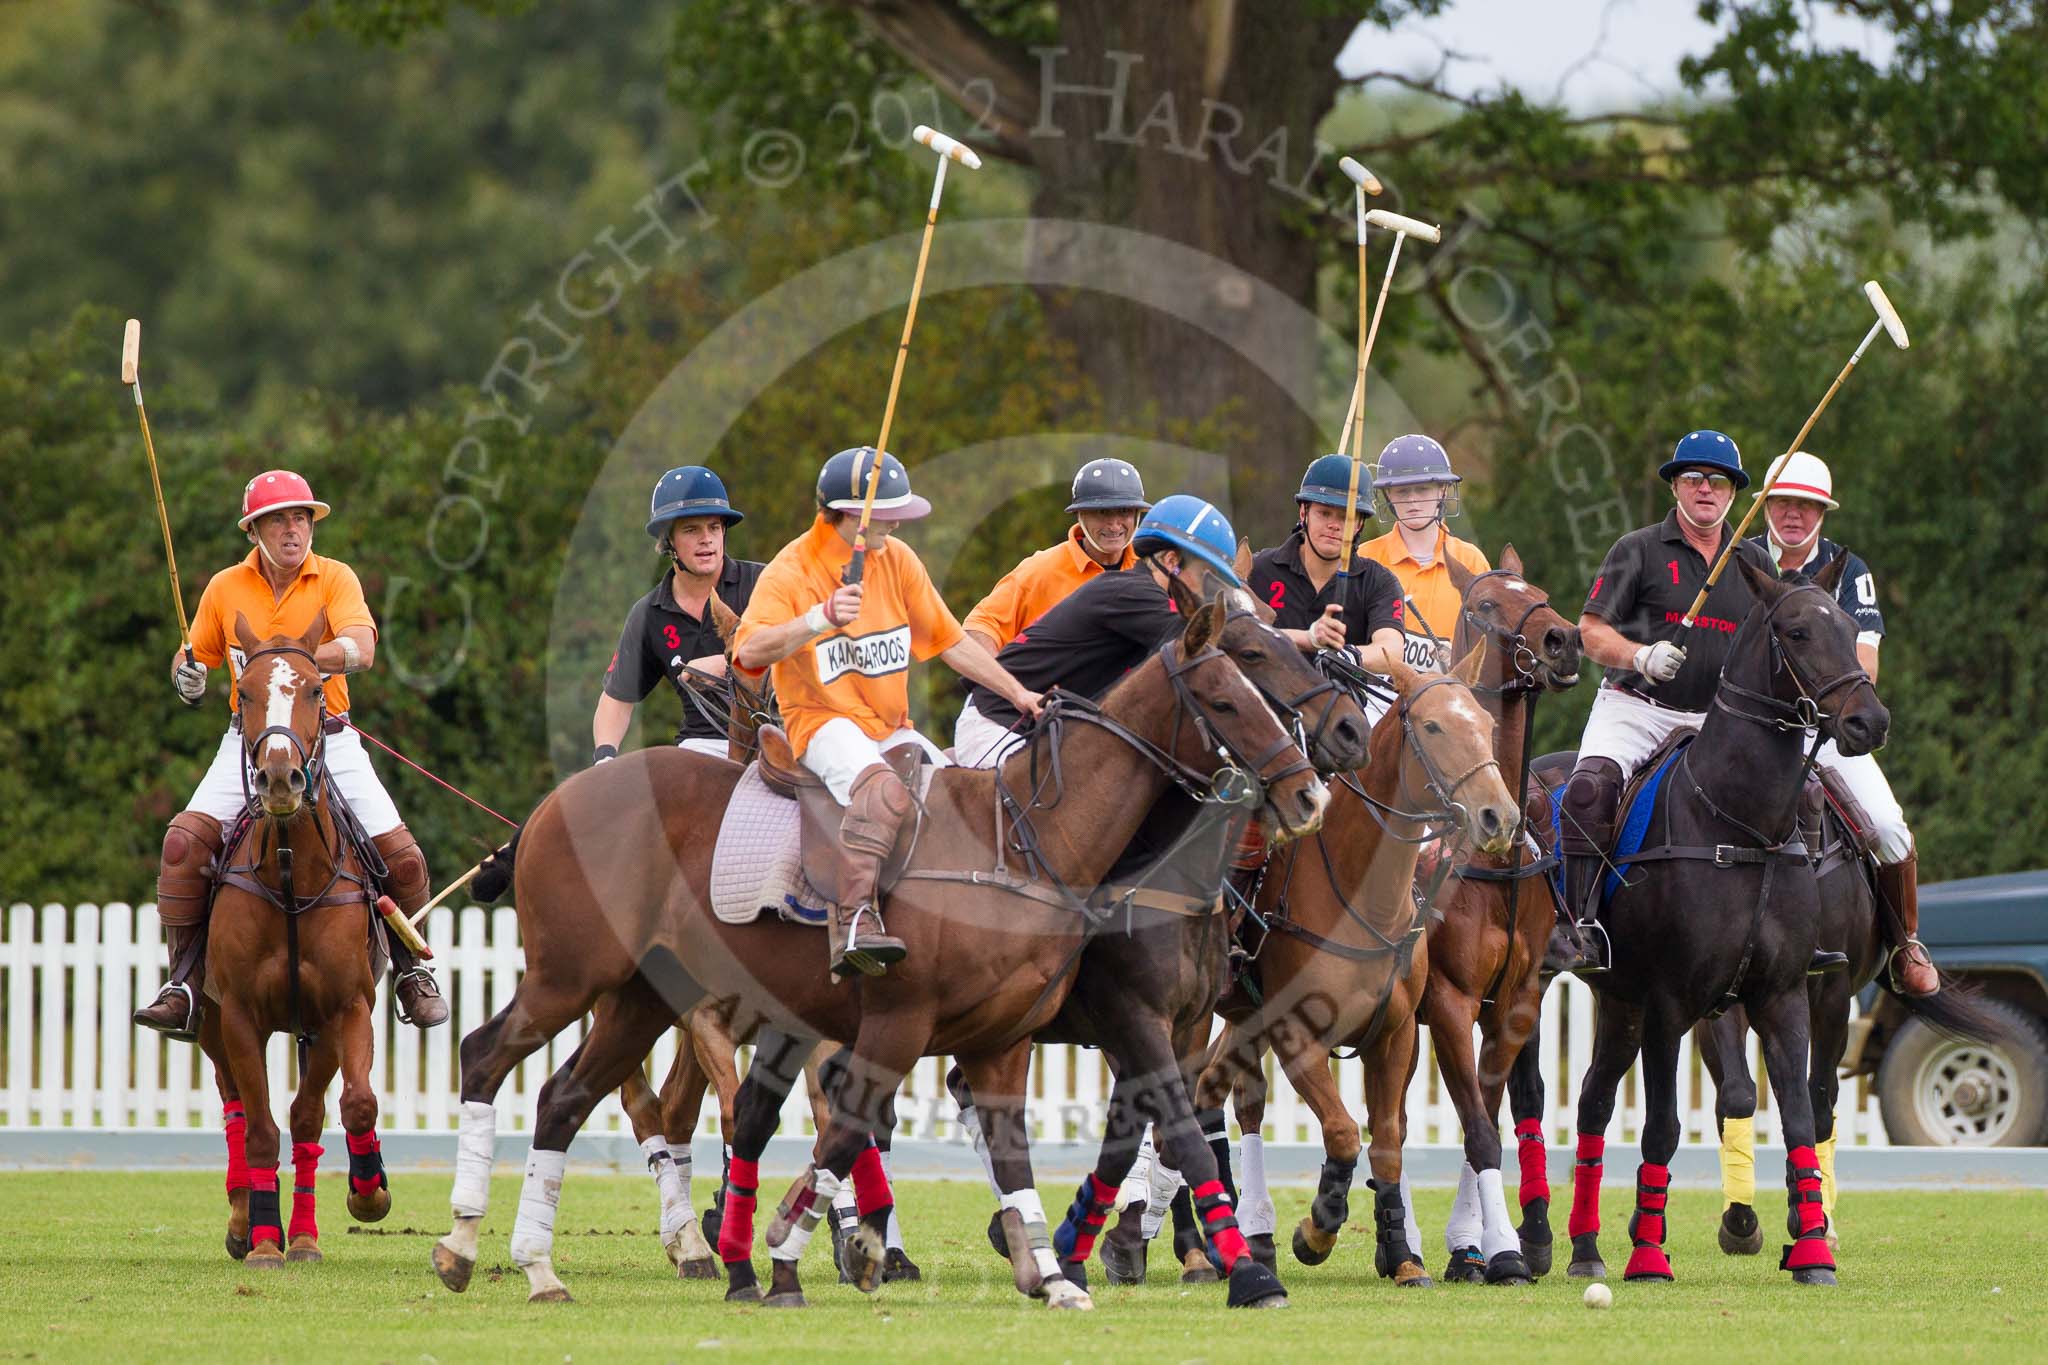 DBPC Polo in the Park 2012: After the second throw-in, Kangaroos v Marston, on the very right umpire Ian 'Ginger' Hunt..
Dallas Burston Polo Club,
Stoneythorpe Estate,
Southam,
Warwickshire,
United Kingdom,
on 16 September 2012 at 10:12, image #34